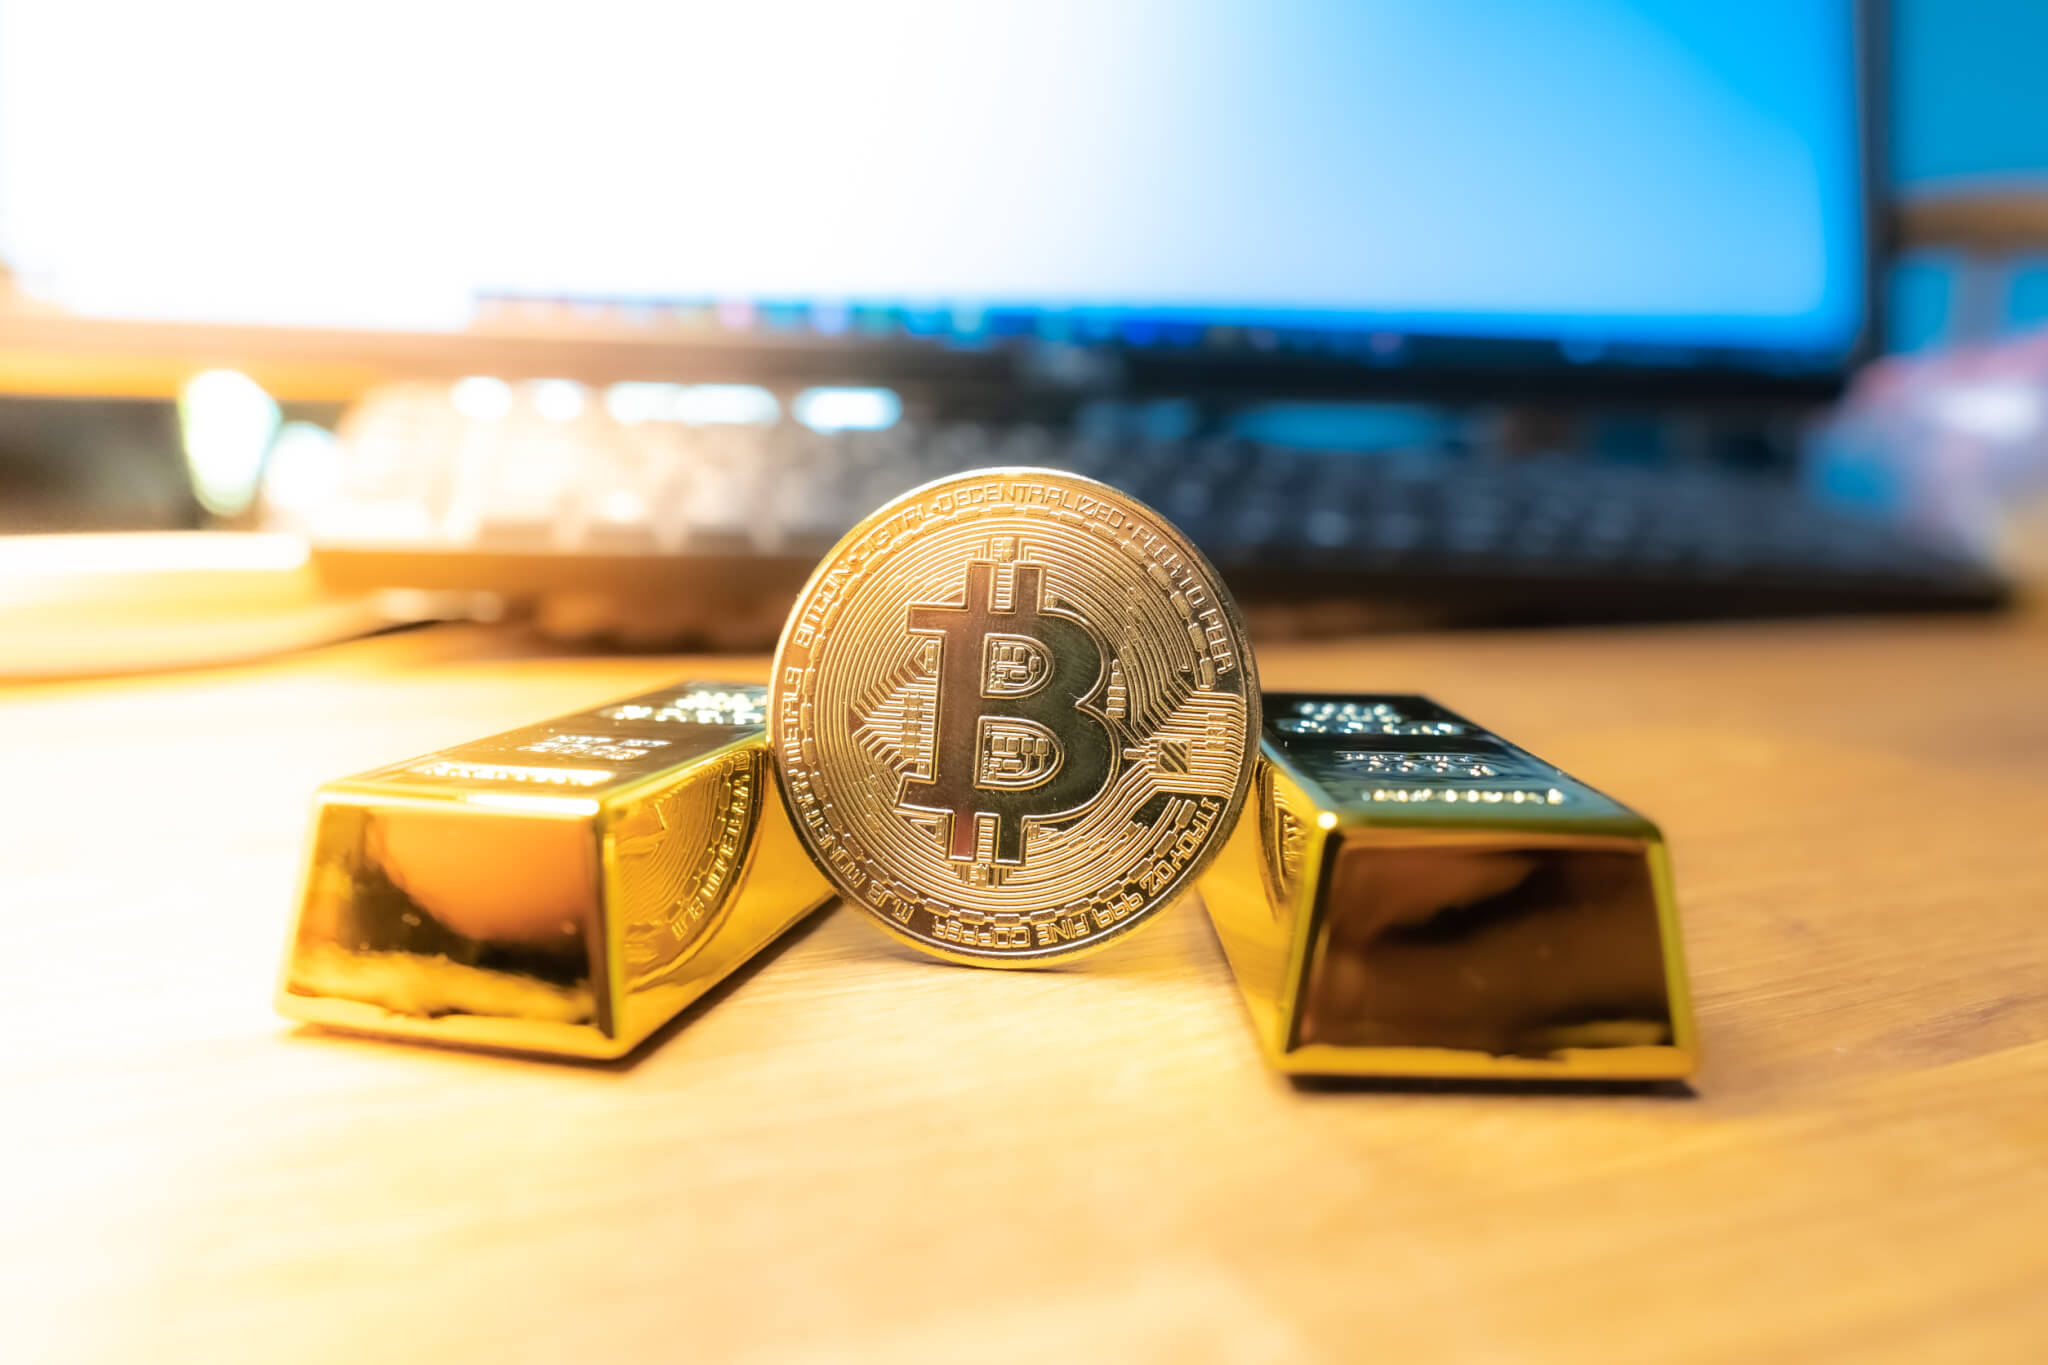 galaxy digital ceo shares view on bitcoin